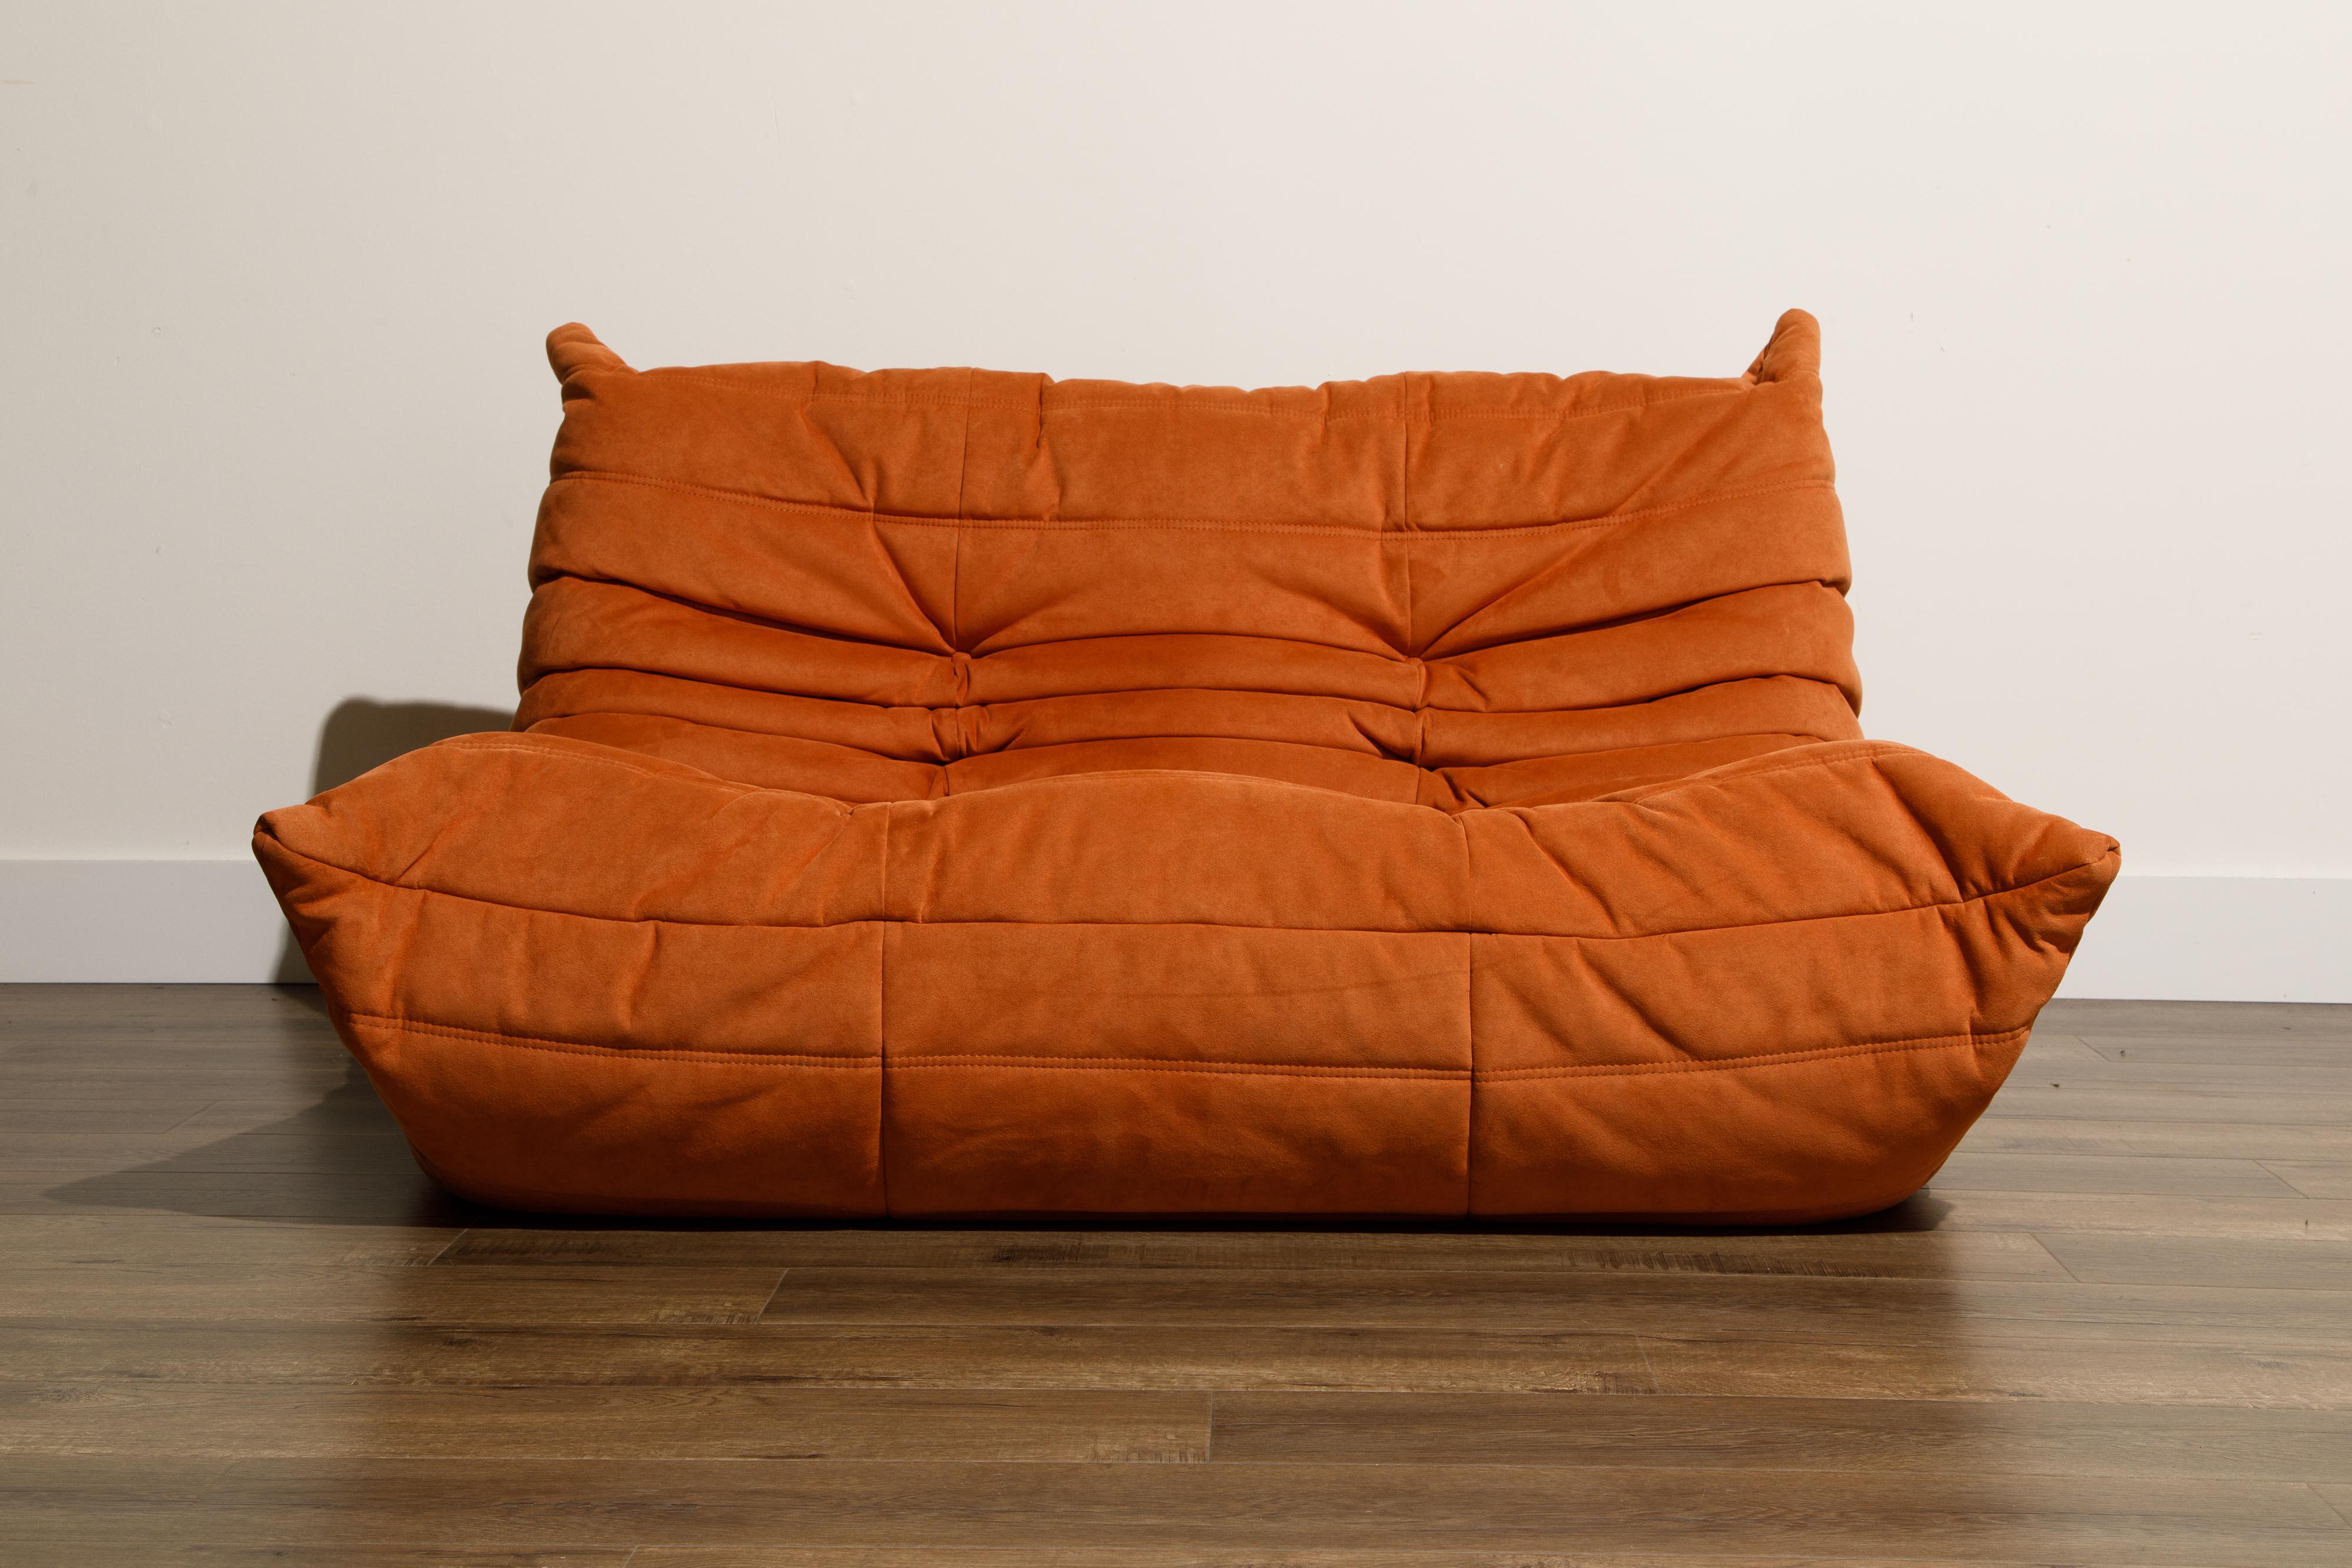 This incredible Togo loveseat sofa in orange alcantara was designed by Michel Ducaroy in 1973 for Ligne Roset, France. Signed with a Ligne Roset label. Timeless design make this Togo settee by Michel Ducaroy for Ligne Roset the perfect choice for